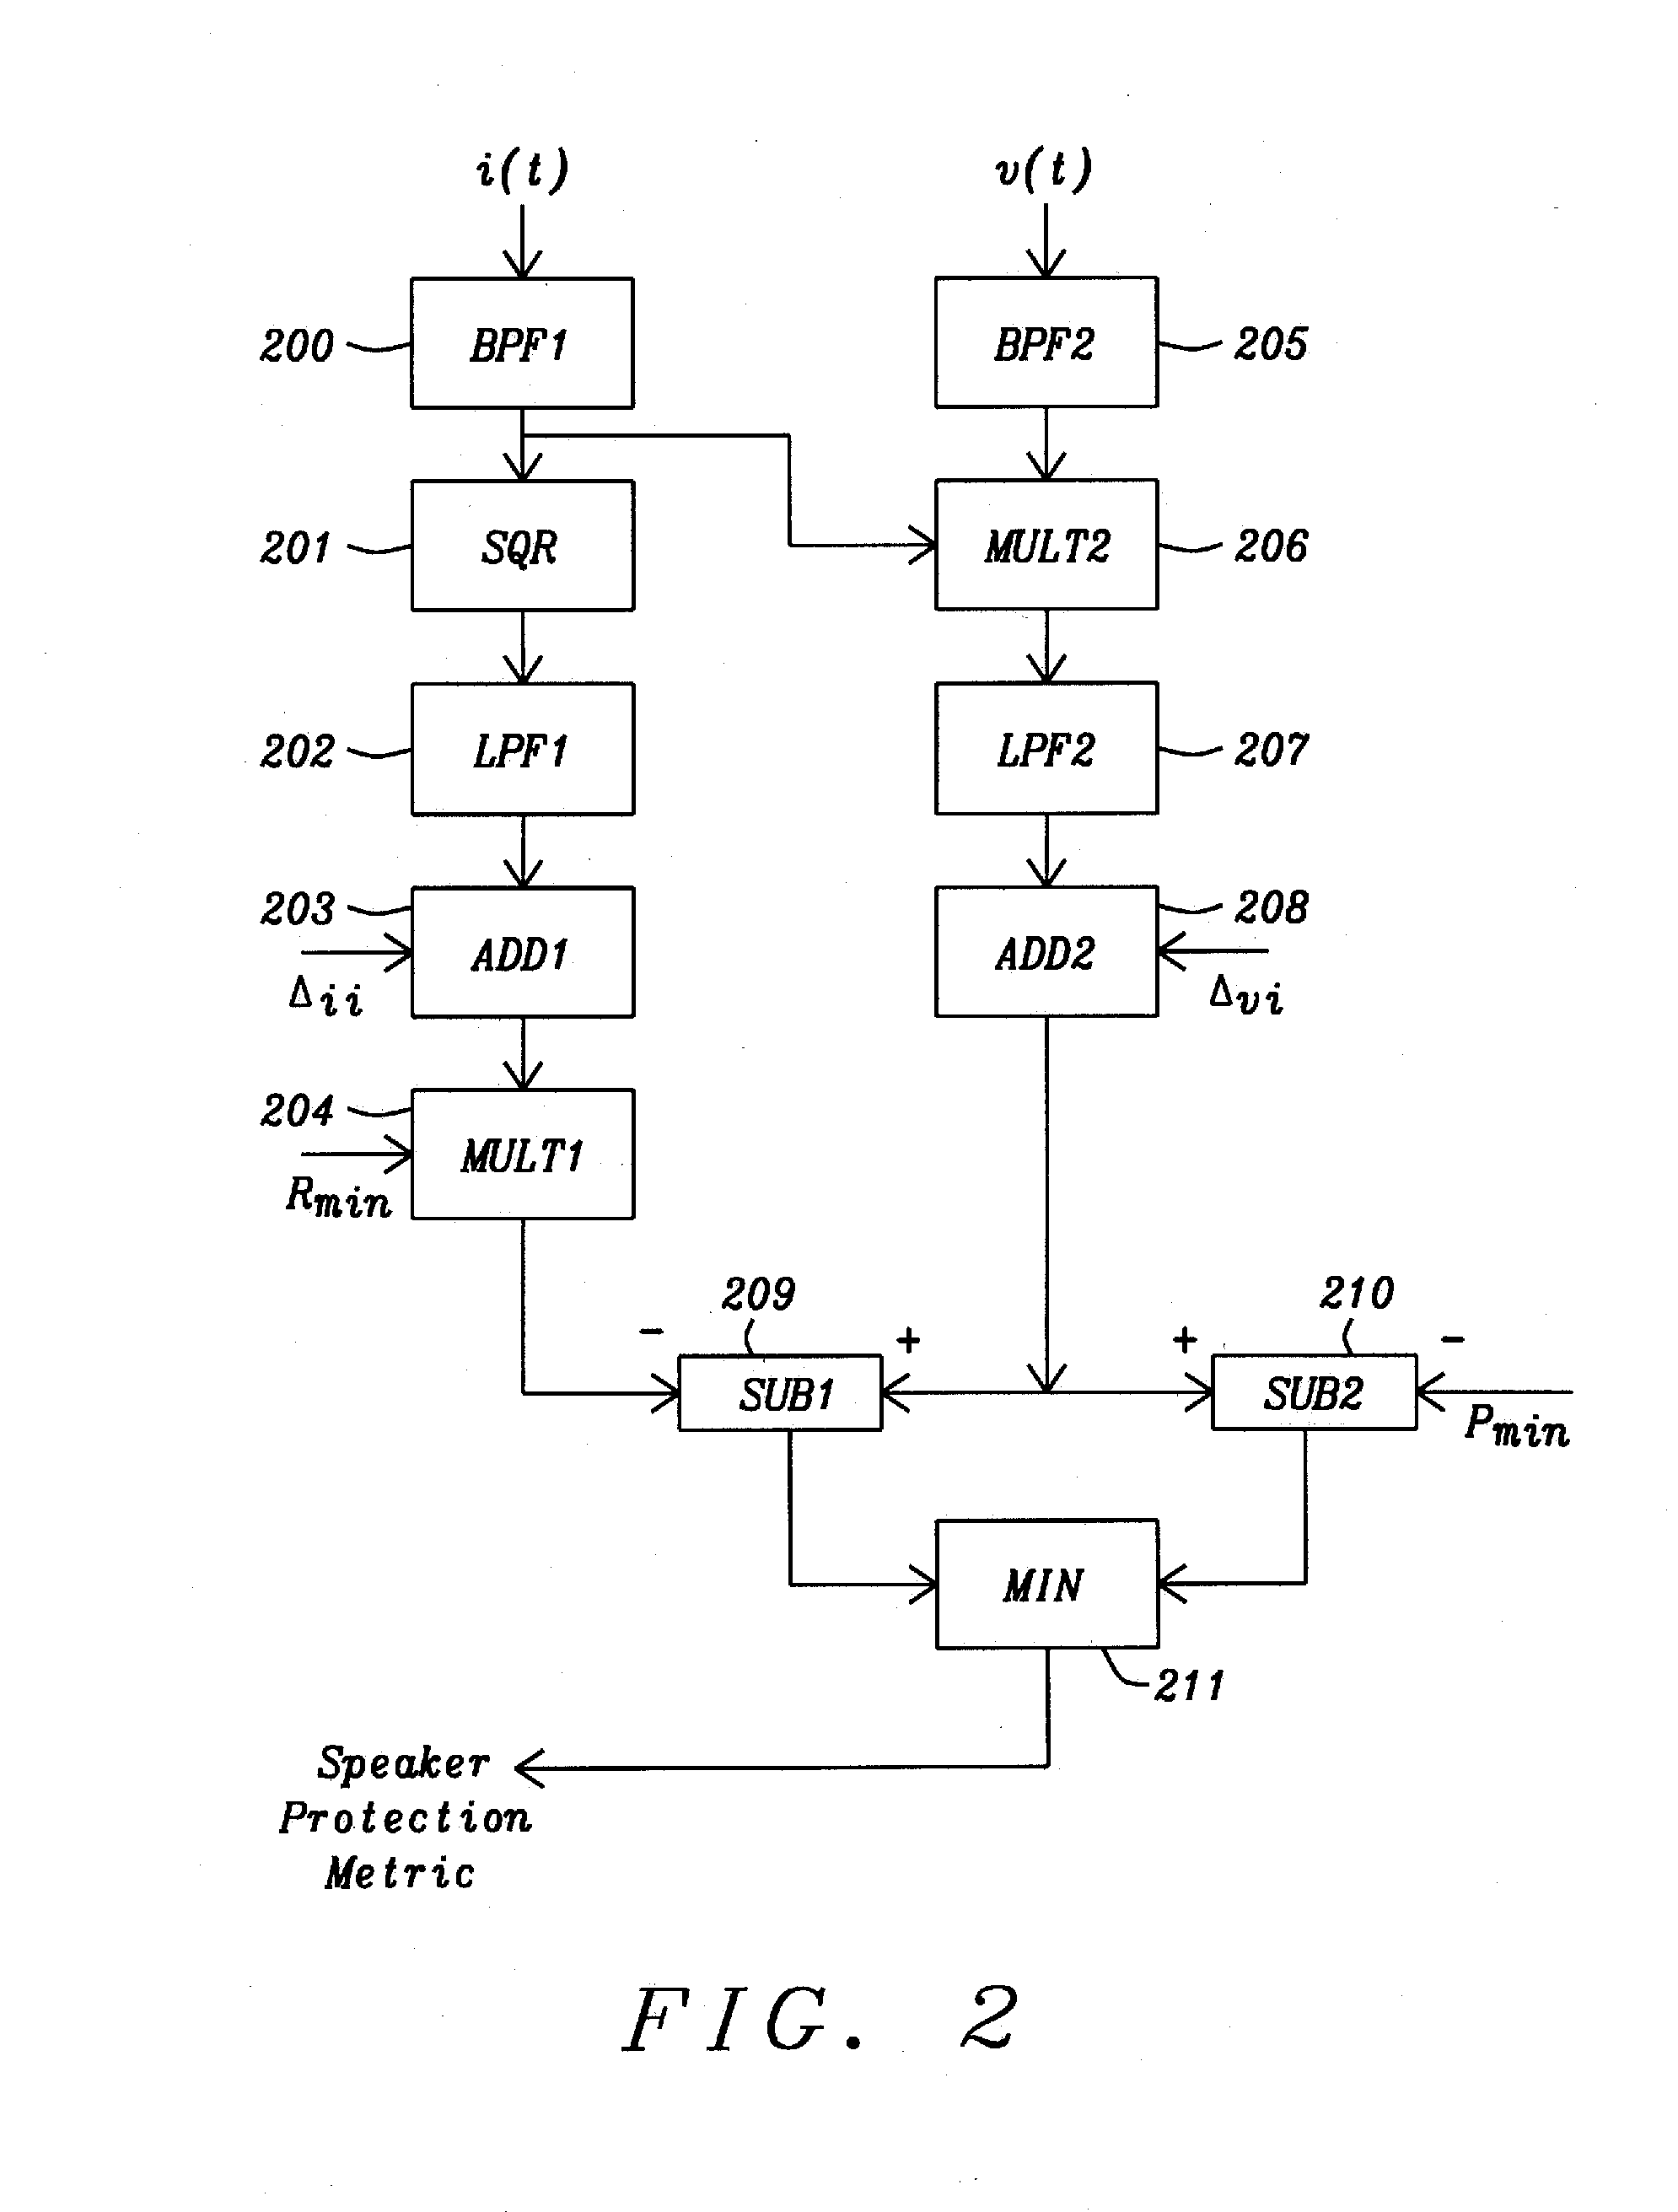 Method and Apparatus for Computing Metric Values for Loudspeaker Protection